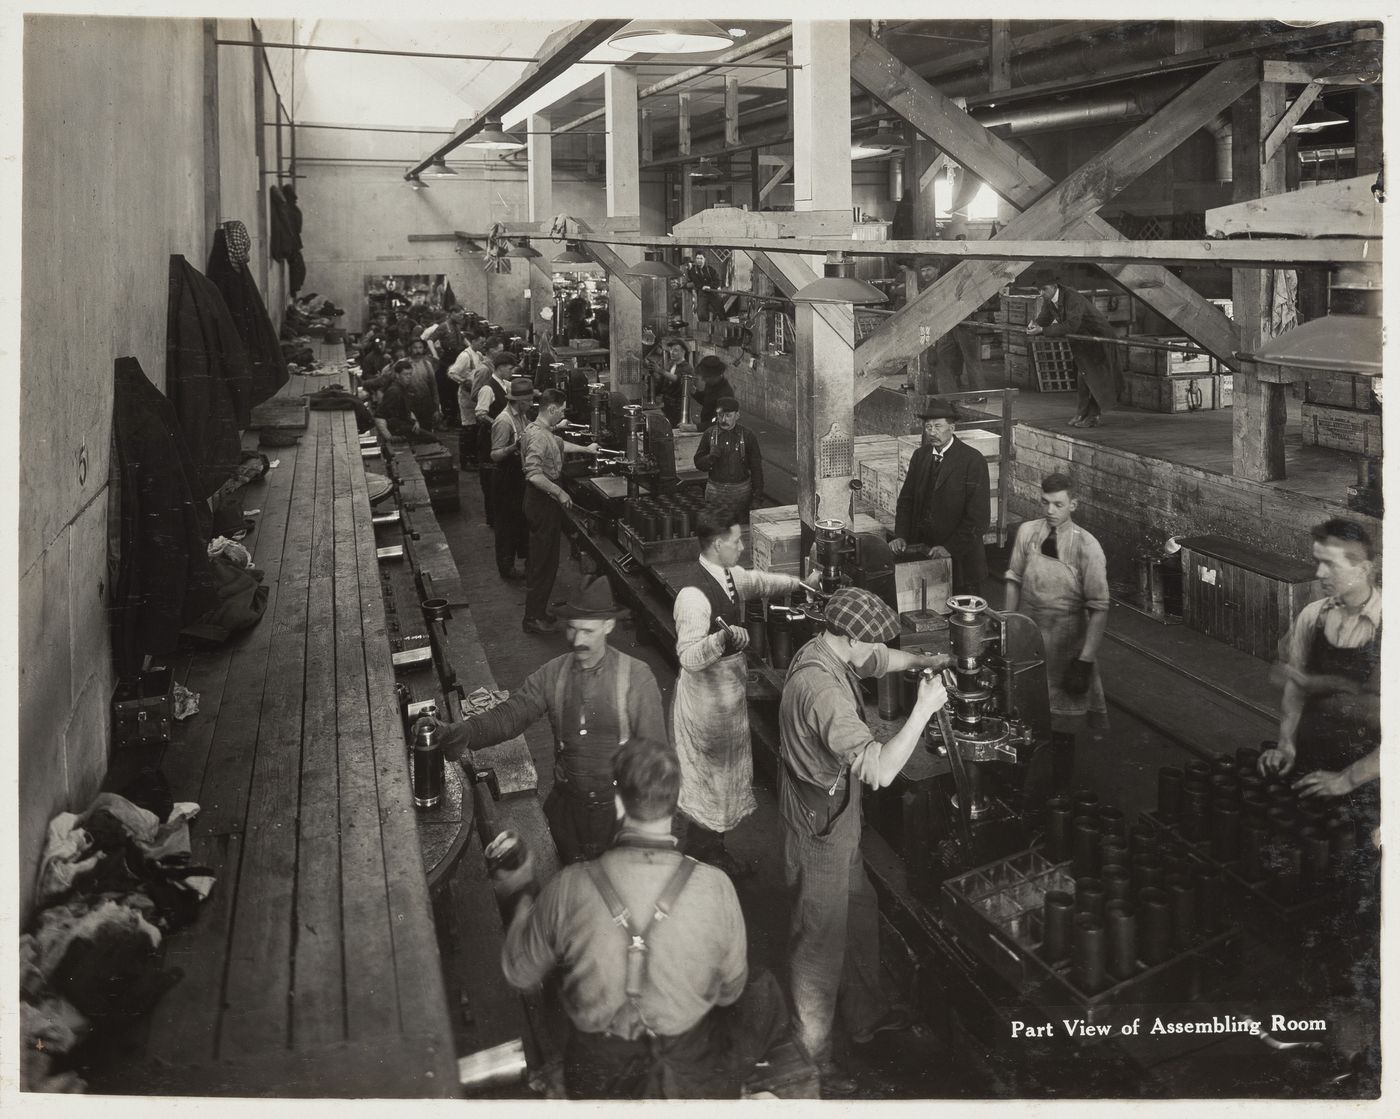 Interior view of workers in the assembling room at the Energite Explosives Plant No. 3, the Shell Loading Plant, Renfrew, Ontario, Canada